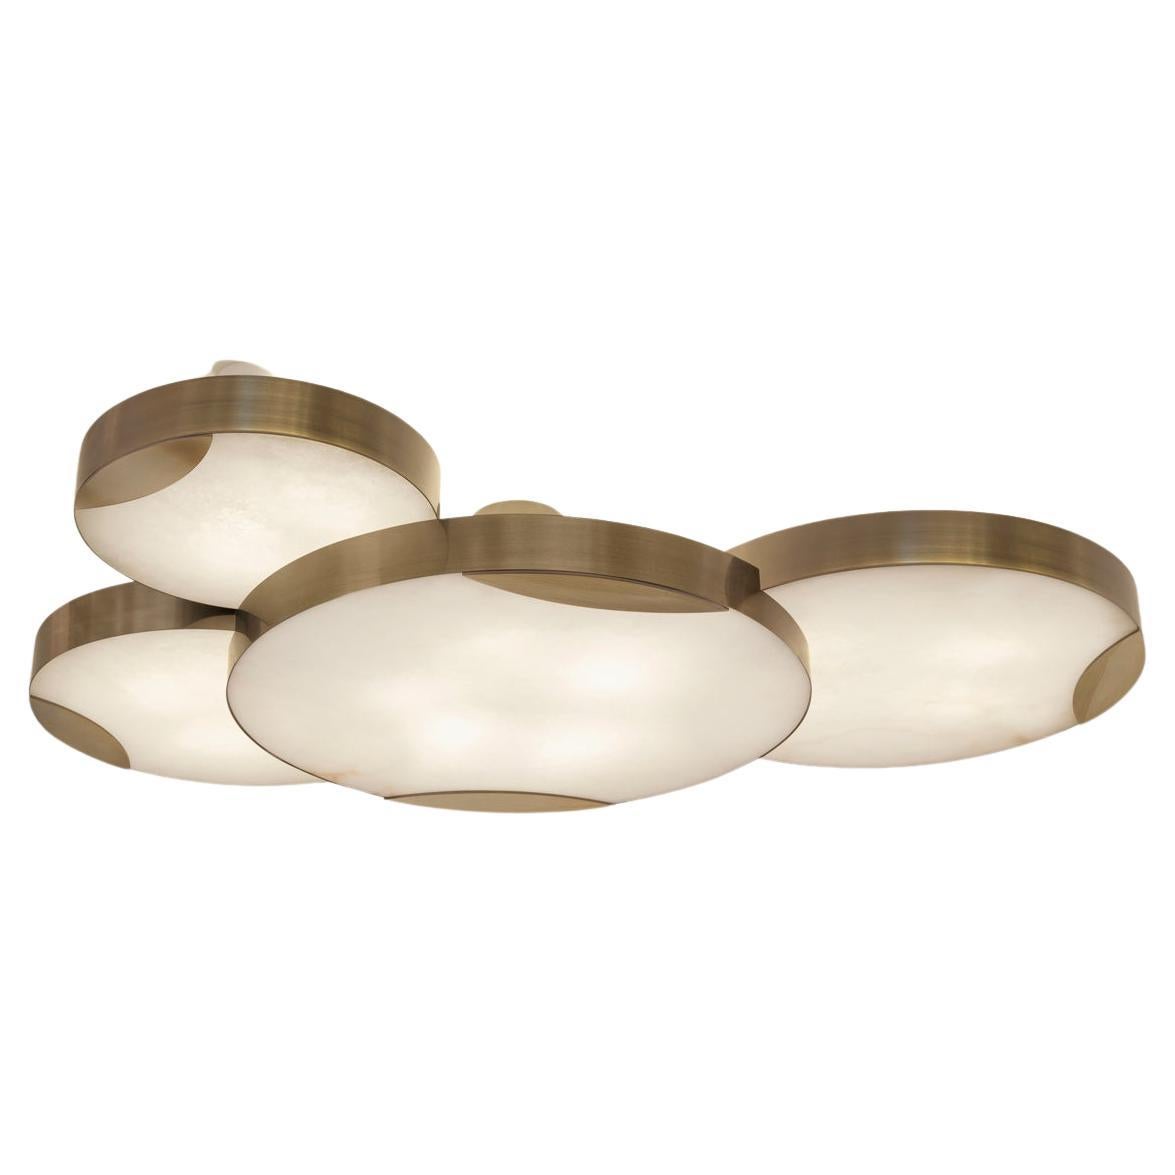 Cloud N.4 Ceiling Light by Gaspare Asaro-Bronze Finish